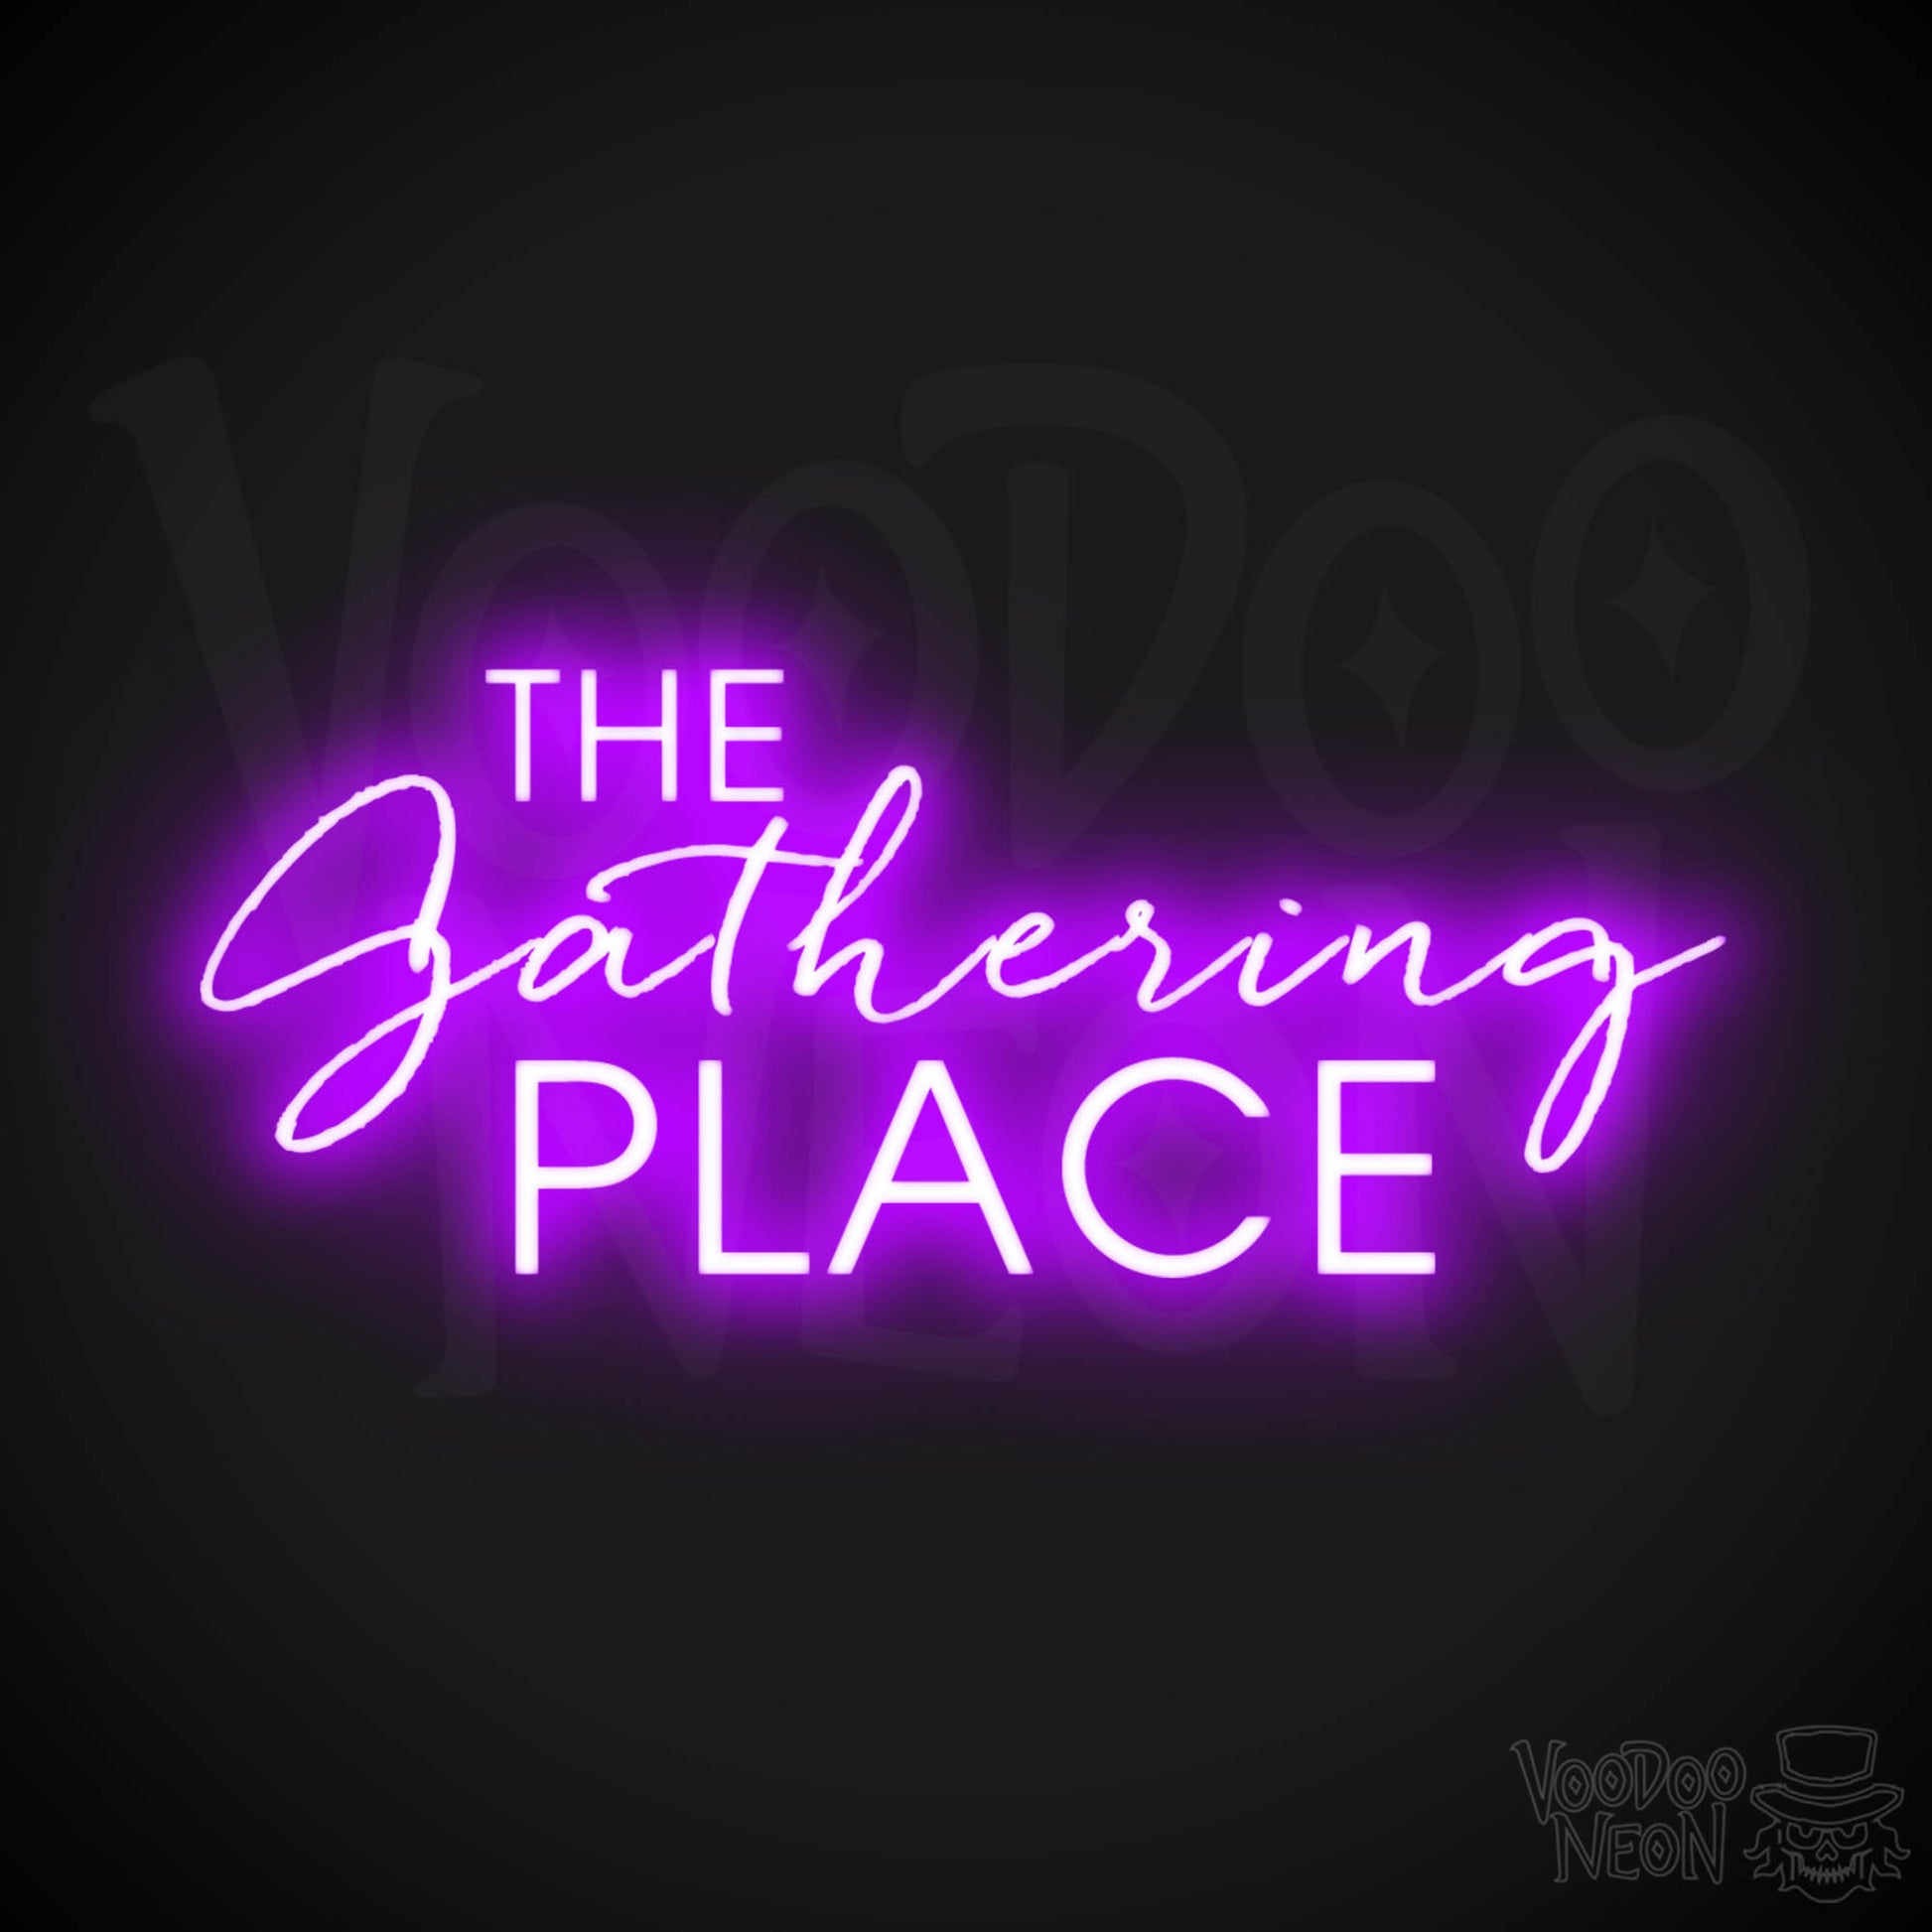 The Gathering Place Neon Sign - Neon The Gathering Place Sign - Wall Art - Color Purple